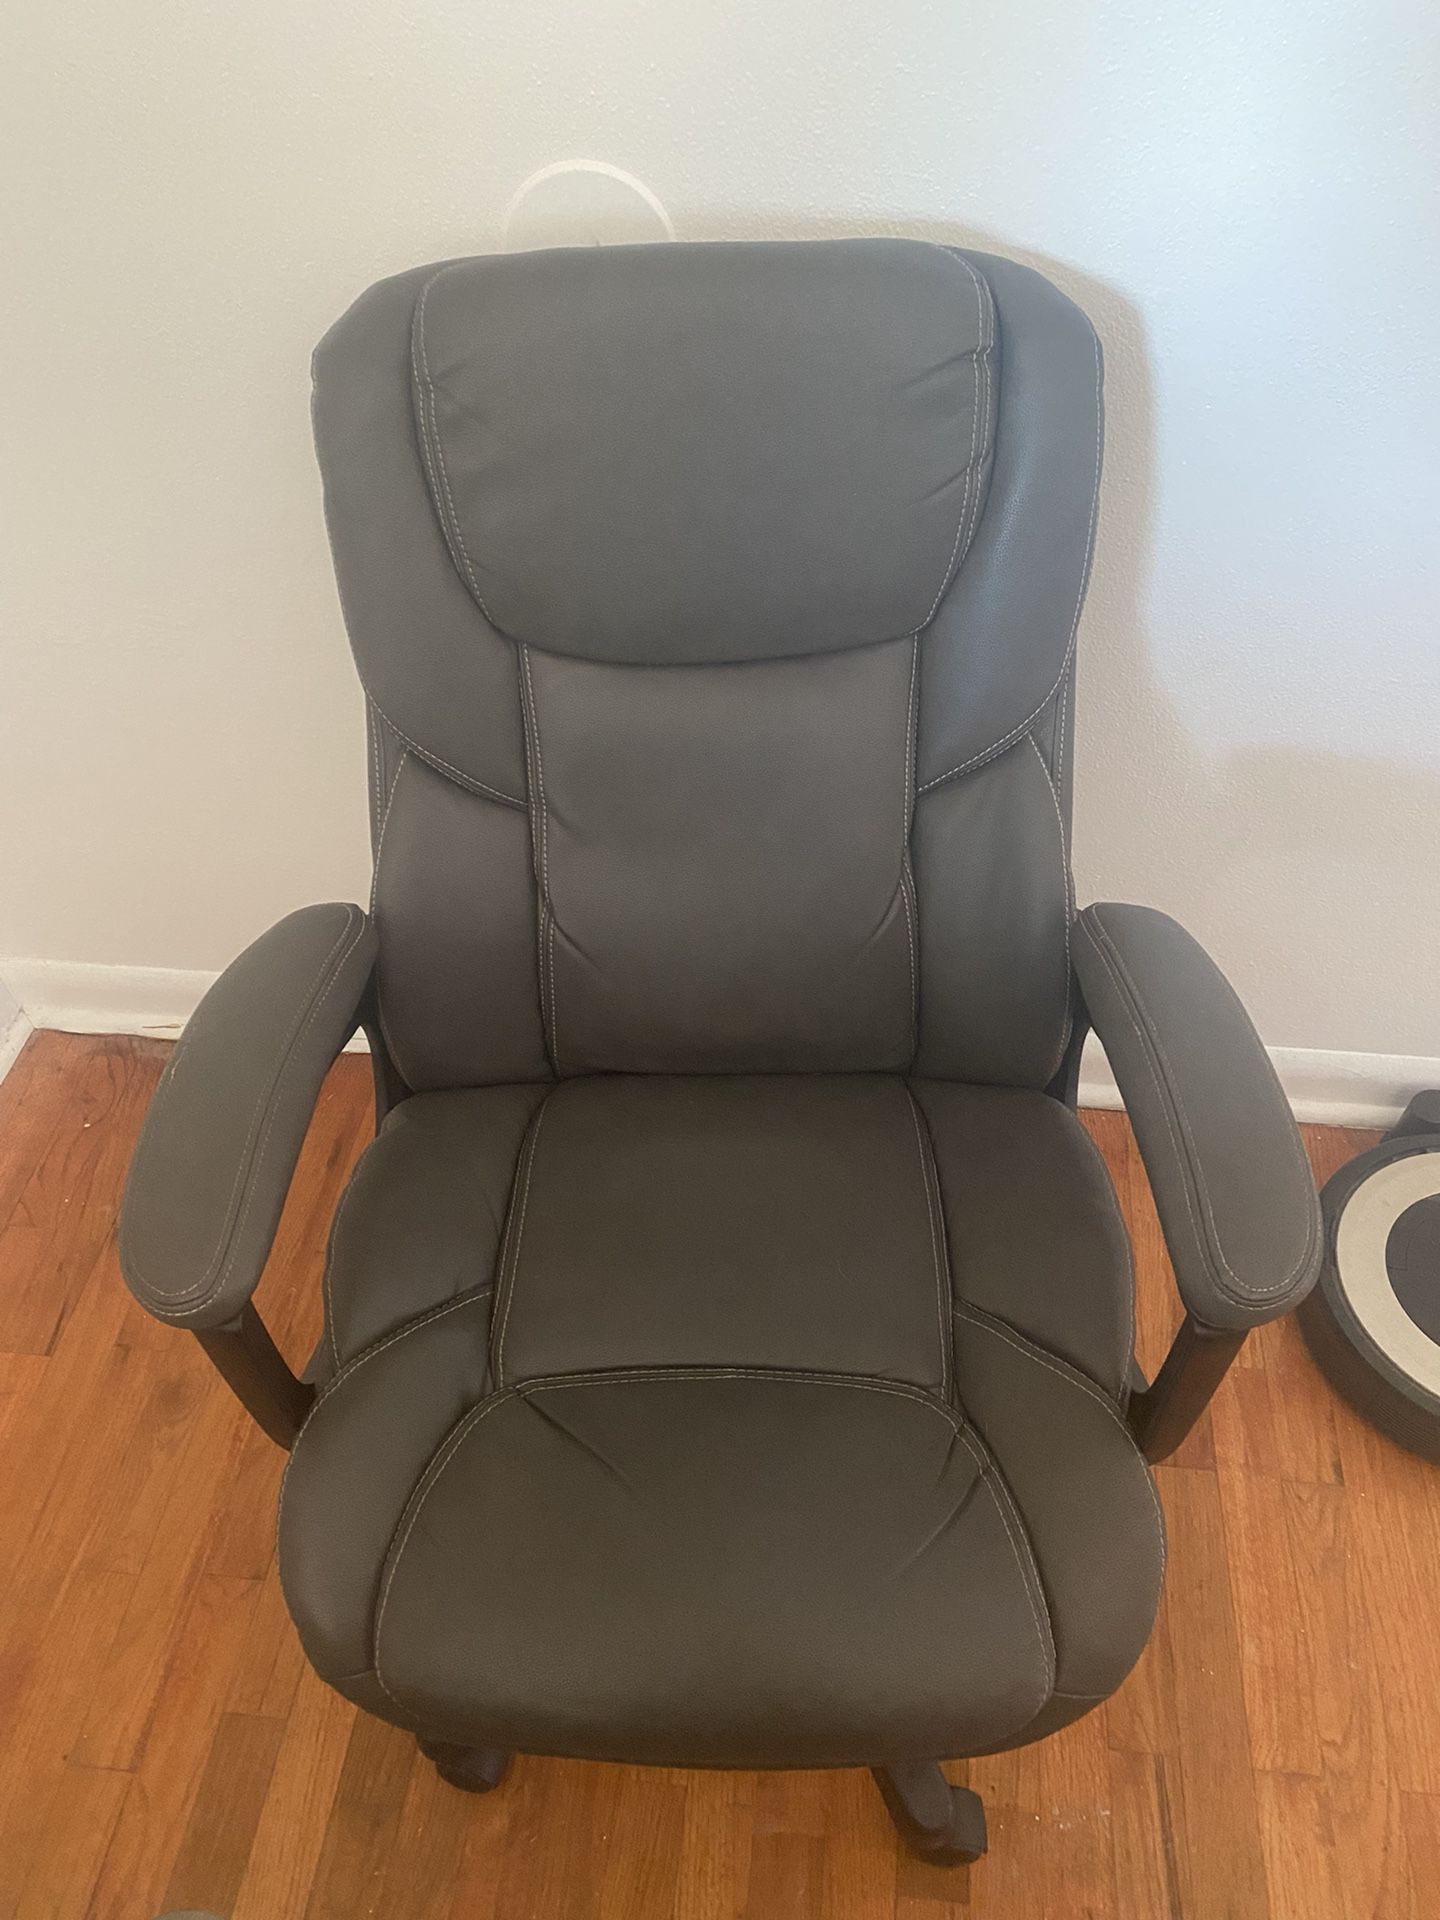 Super Sturdy Comfy Office Chair 